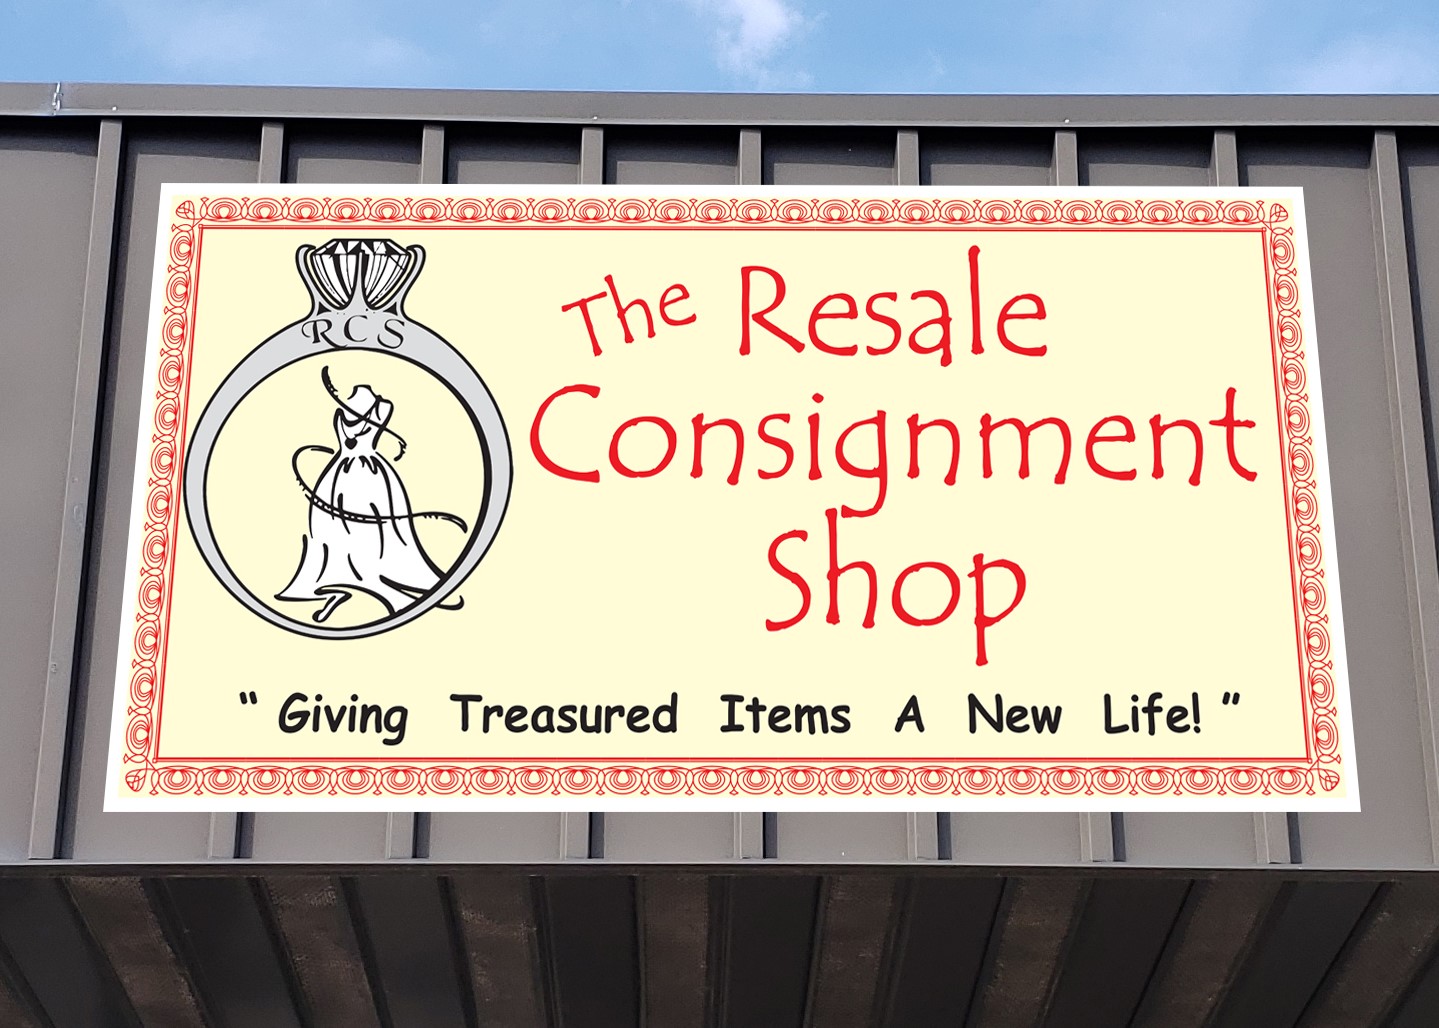 The Resale Consignment Shop